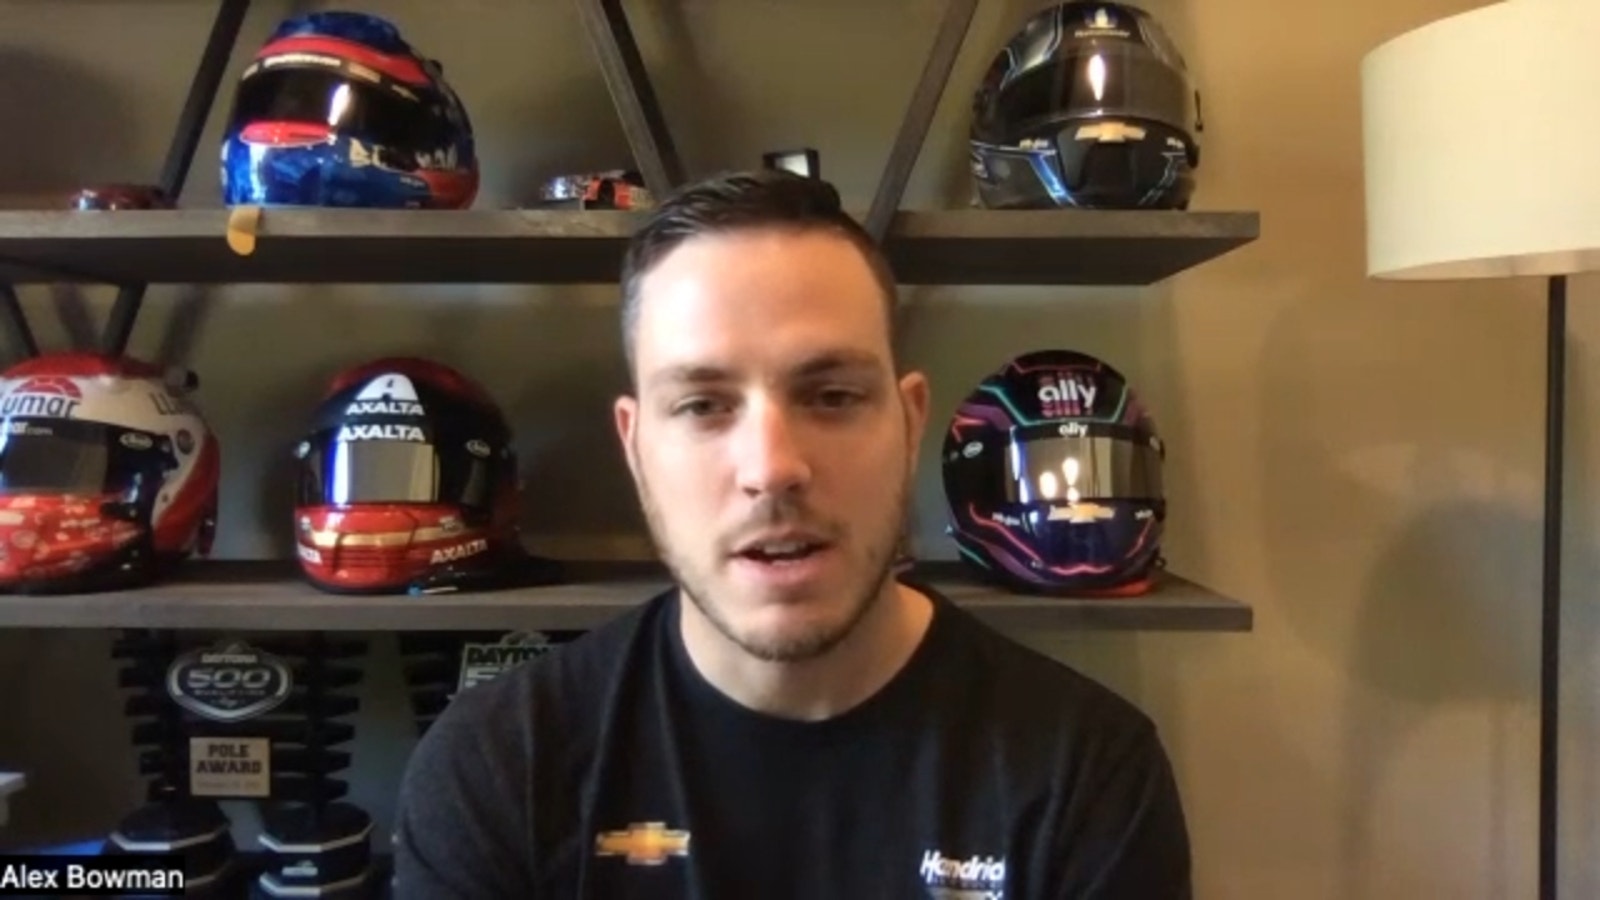 Alex Bowman on non-playoff drivers winning races in the playoffs